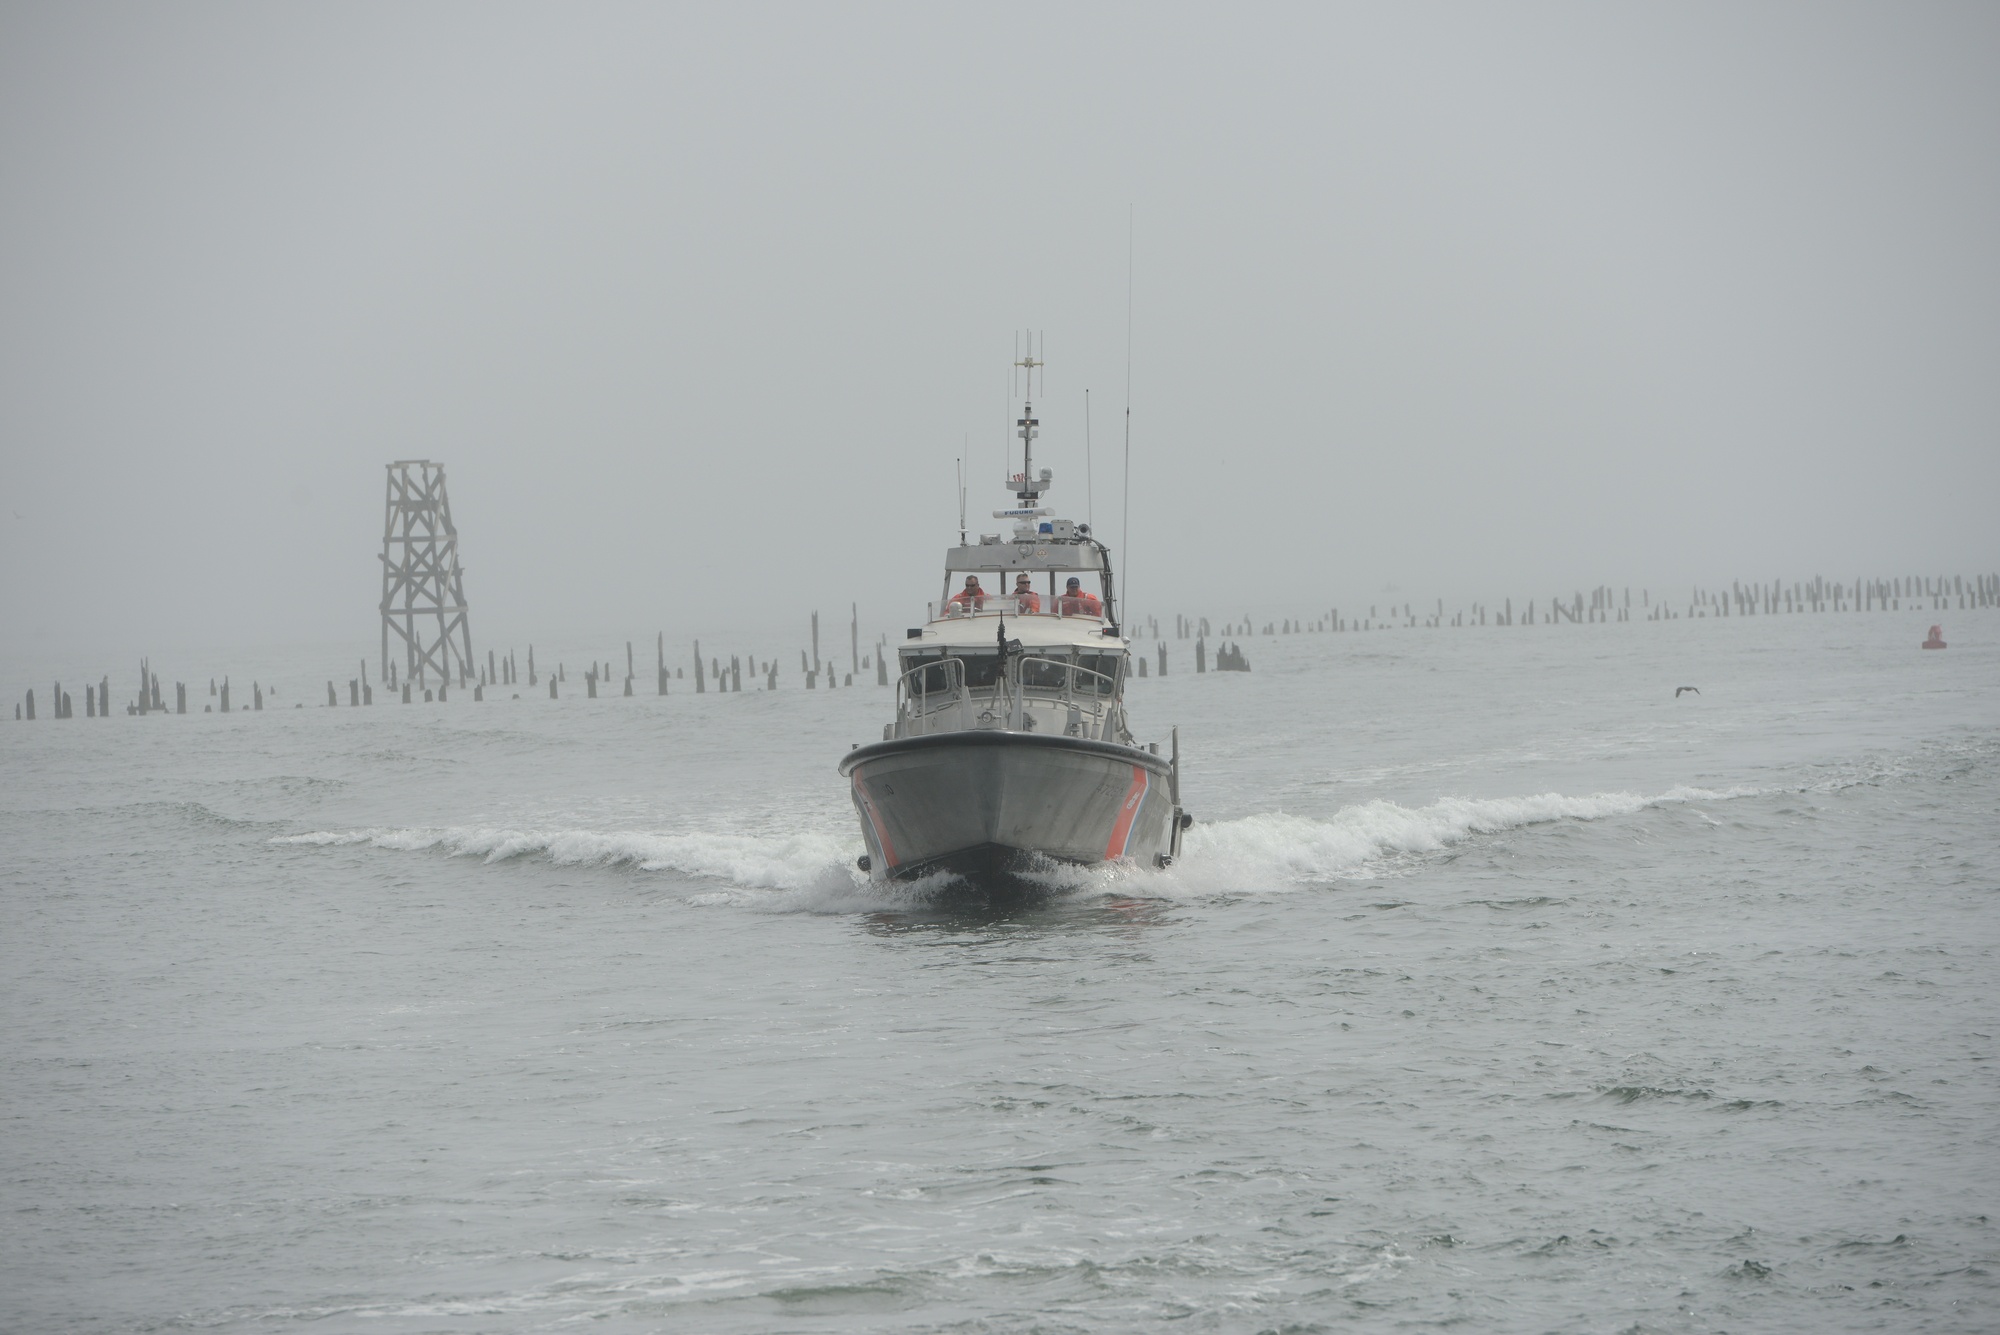 DVIDS - Images - Station Cape Disappointment 47-foot MLB [Image 3